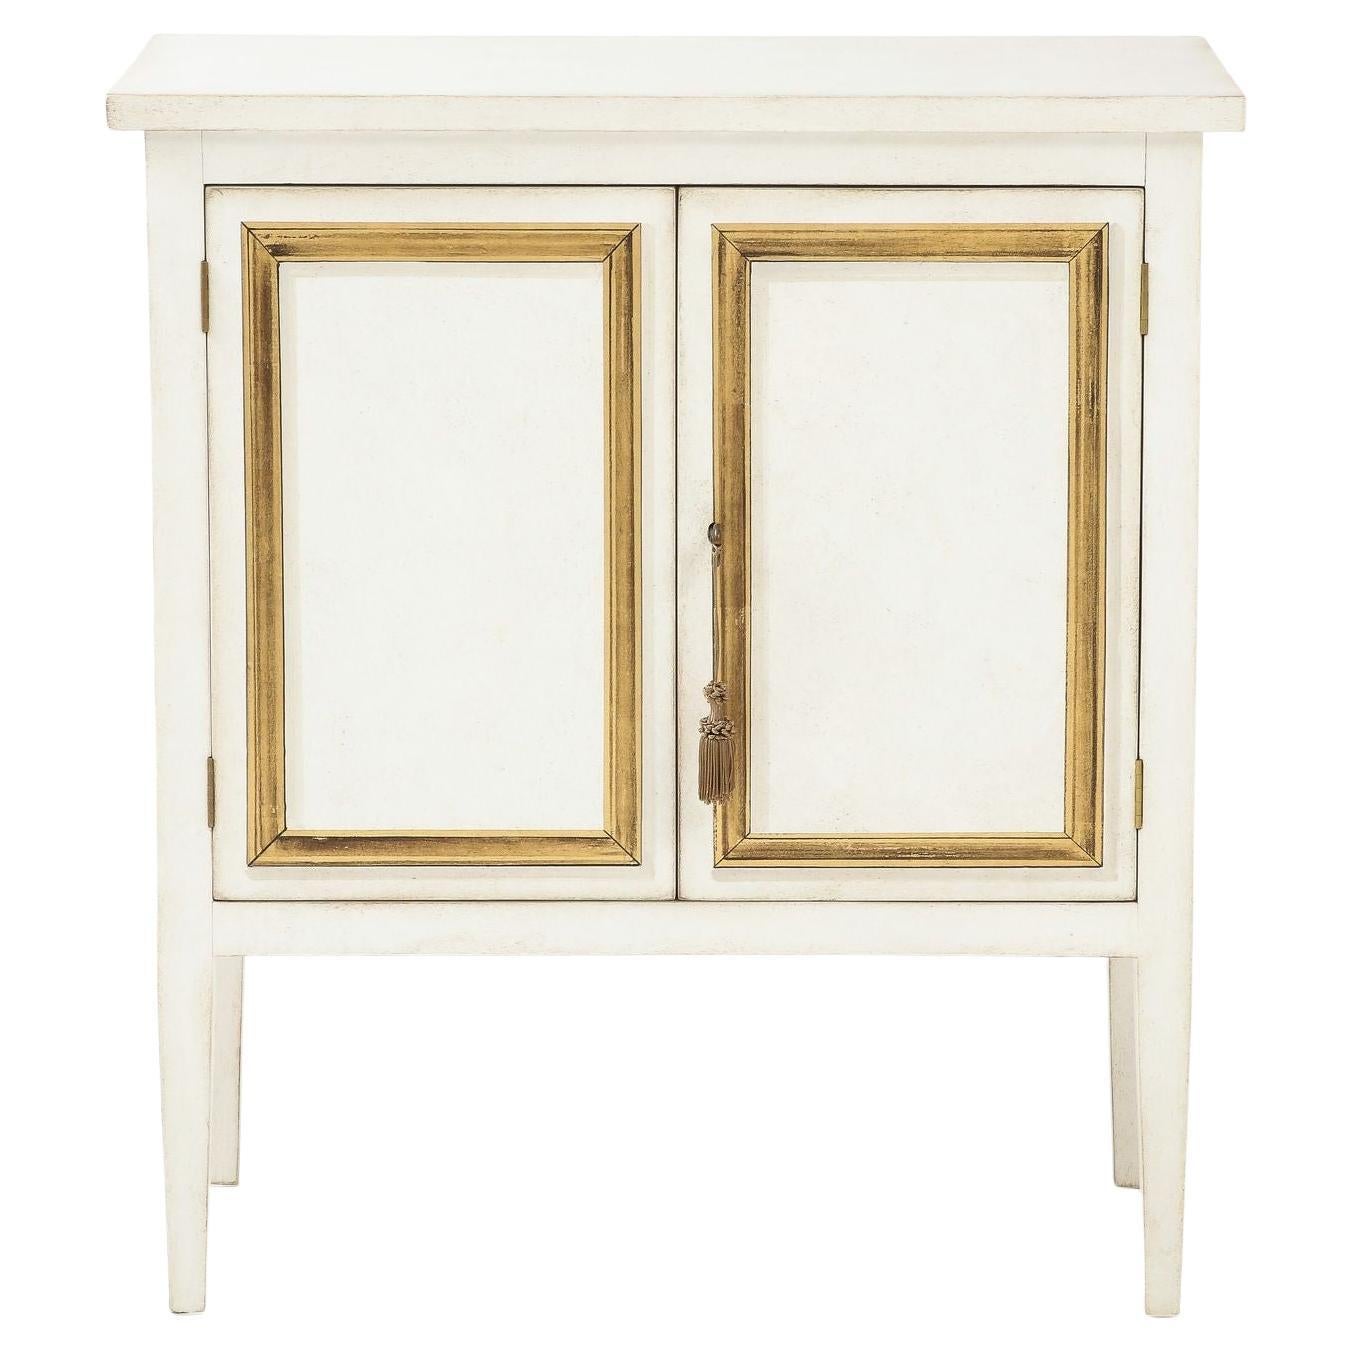 Handpainted Ivory and Gold Trompe l'oeil Cabinet or Nightstand, 21st C. For Sale